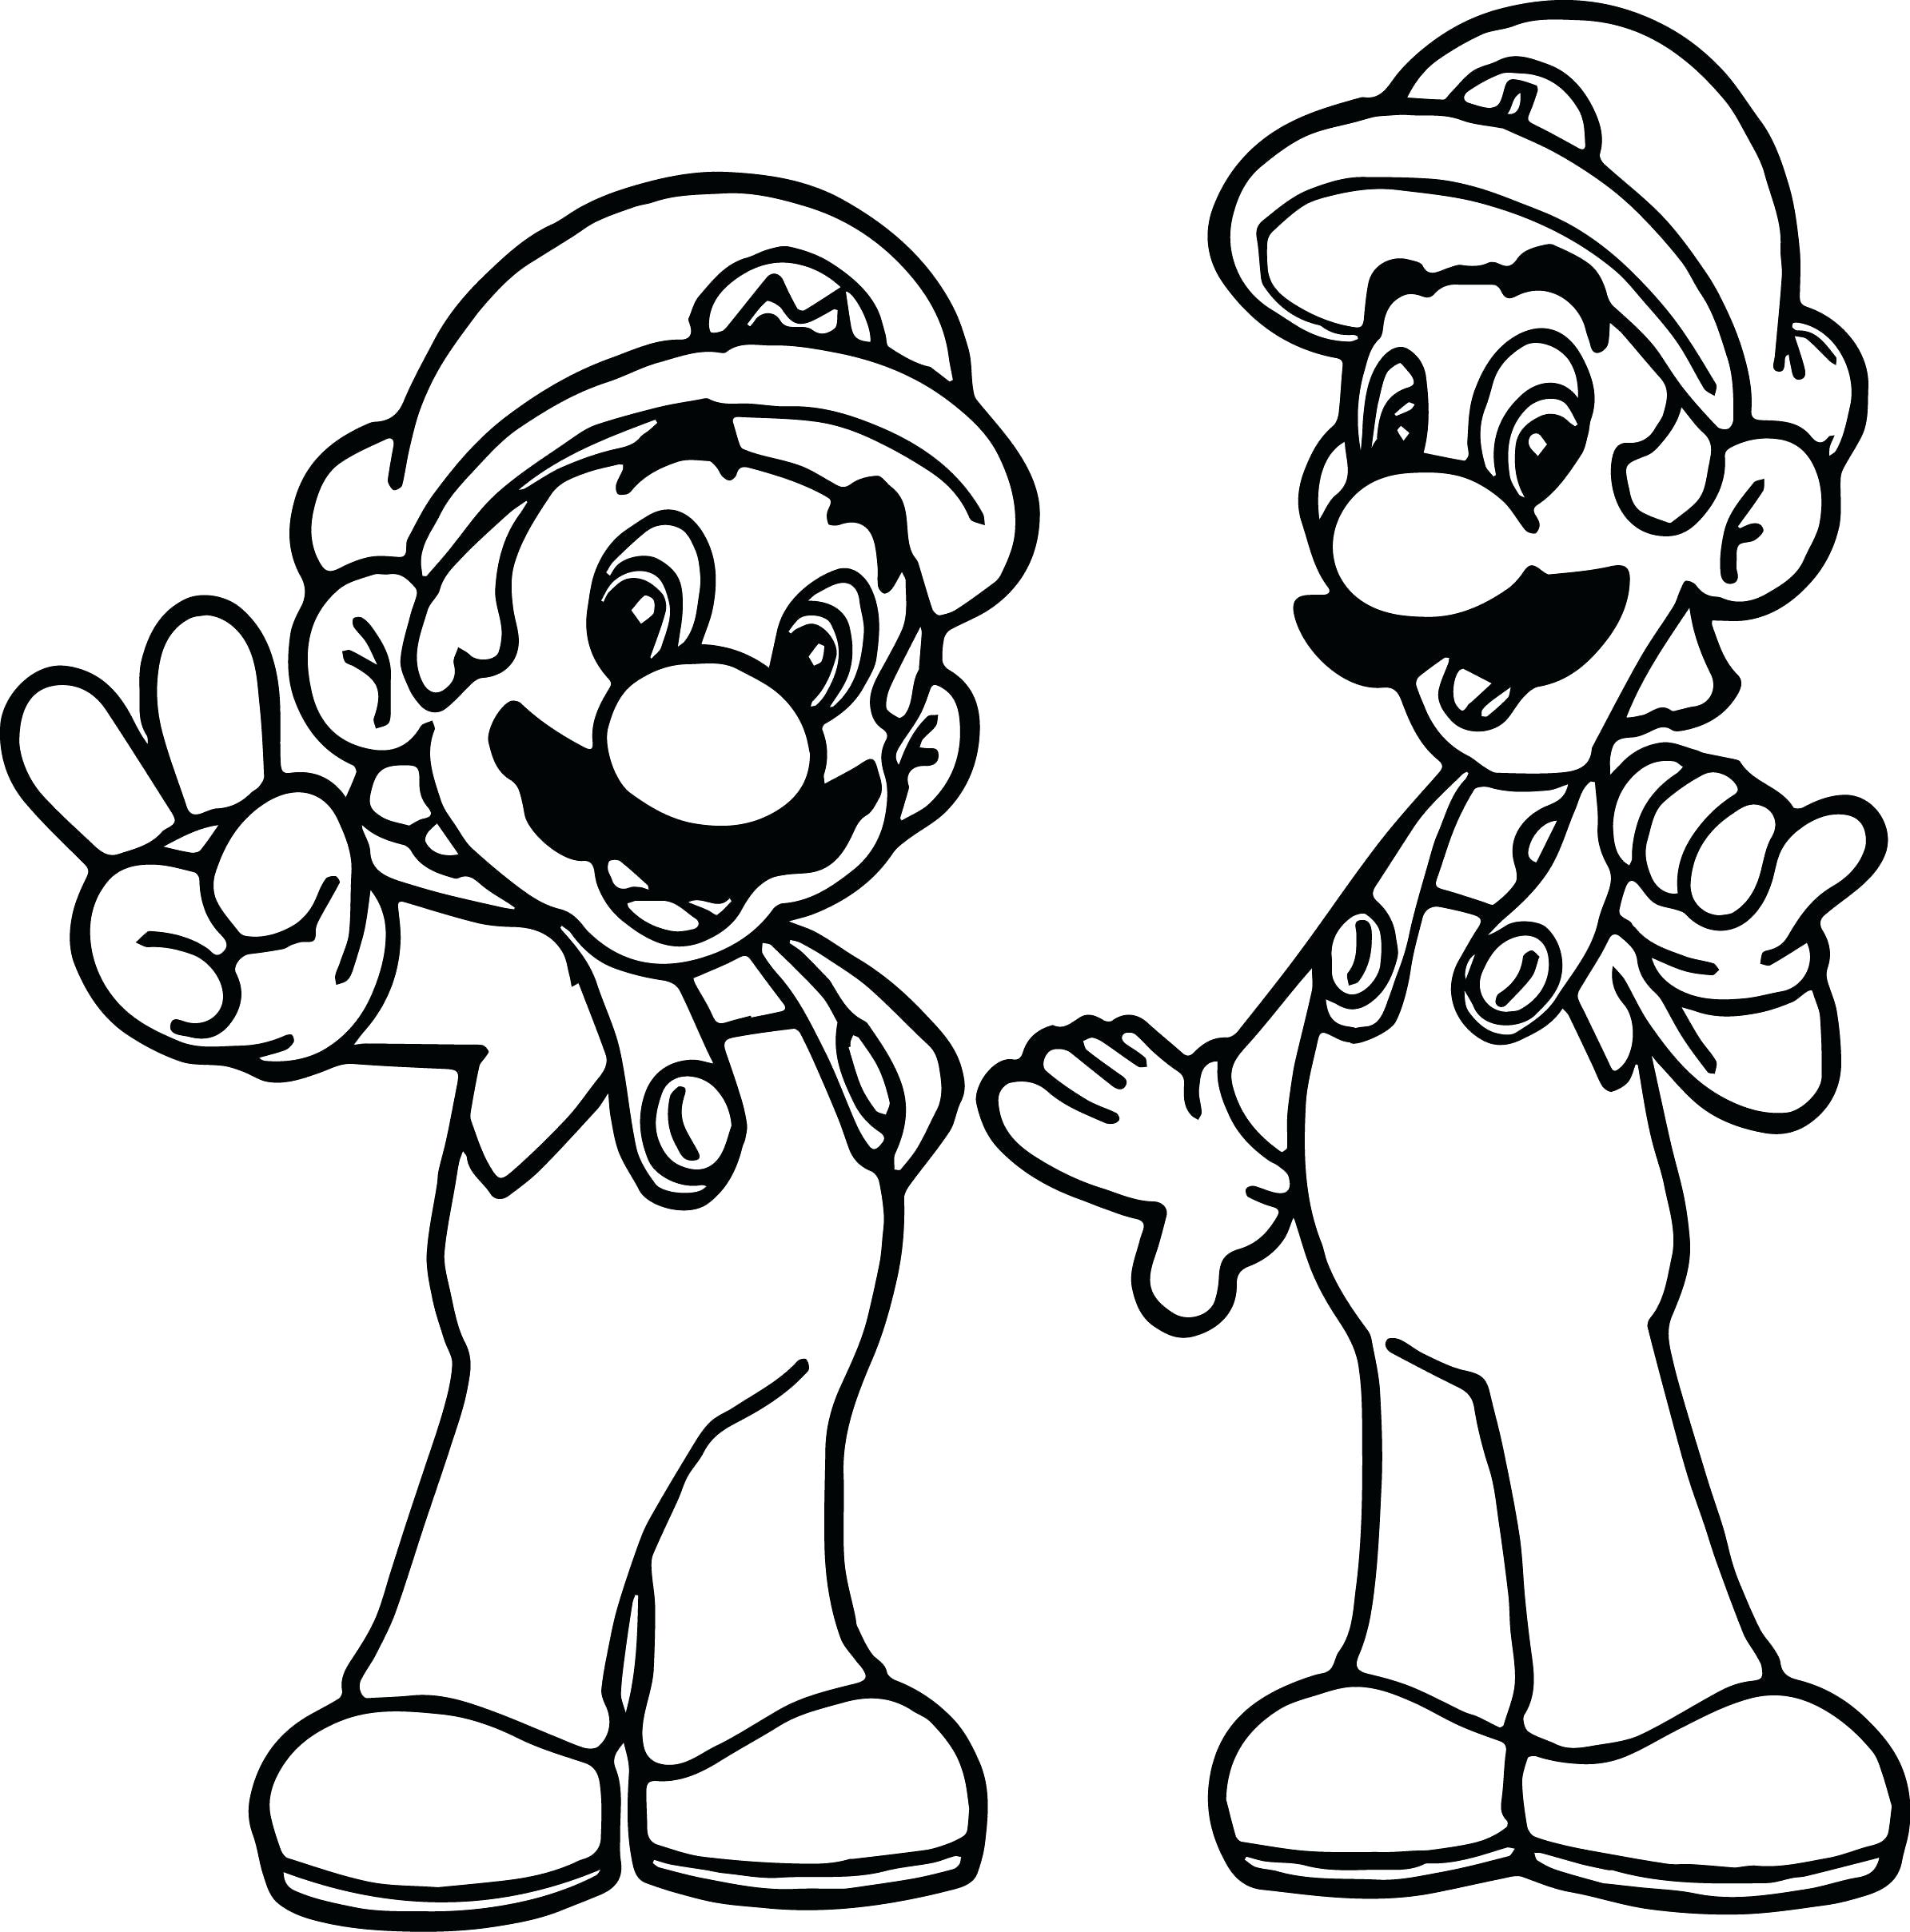 55 Collection Mario Coloring Pages Online  Latest Free